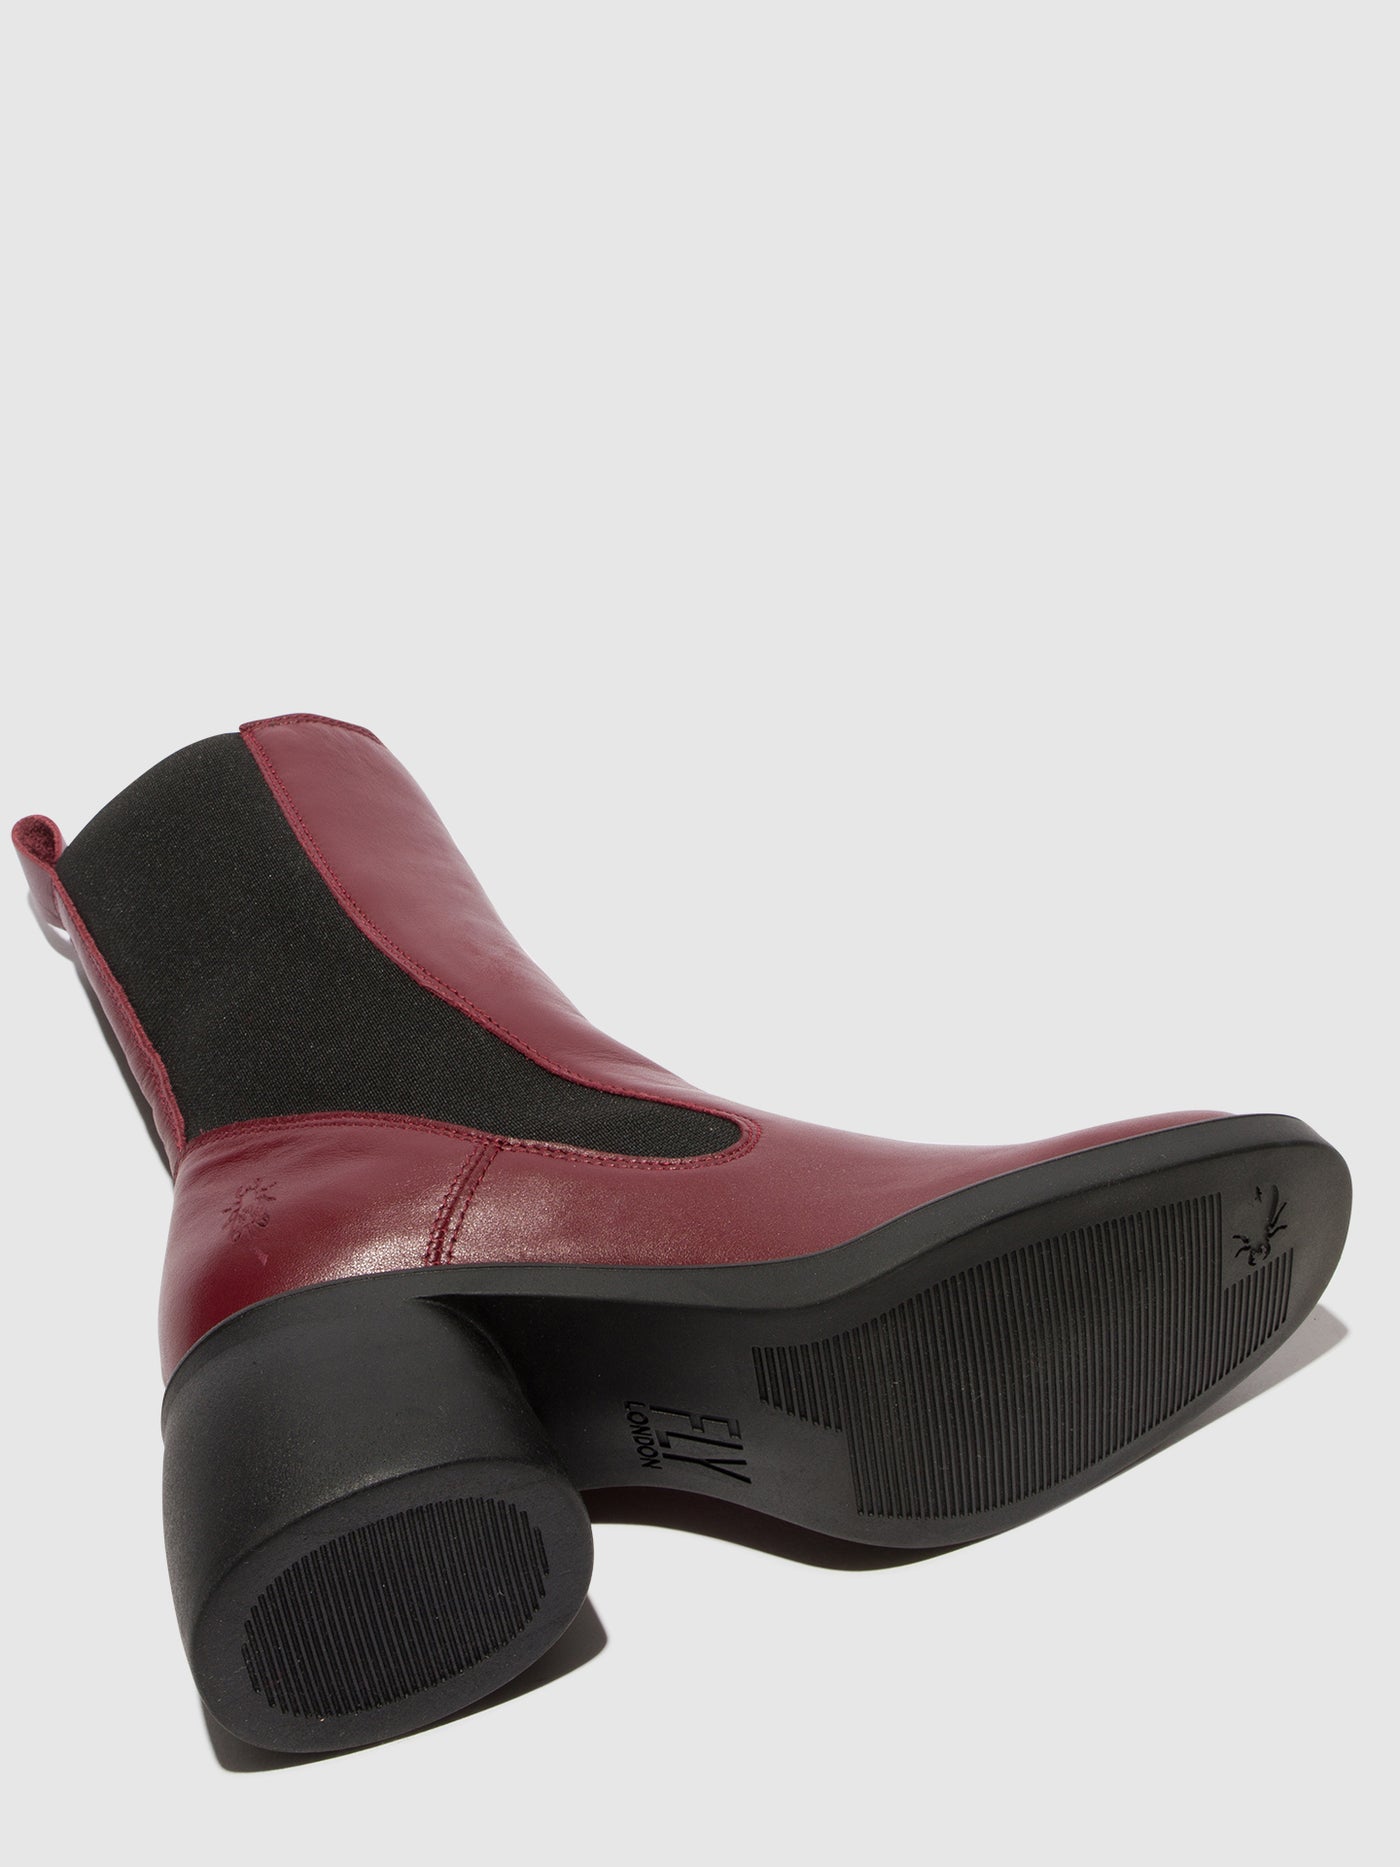 Chelsea Boots HOWI995FLY WINE